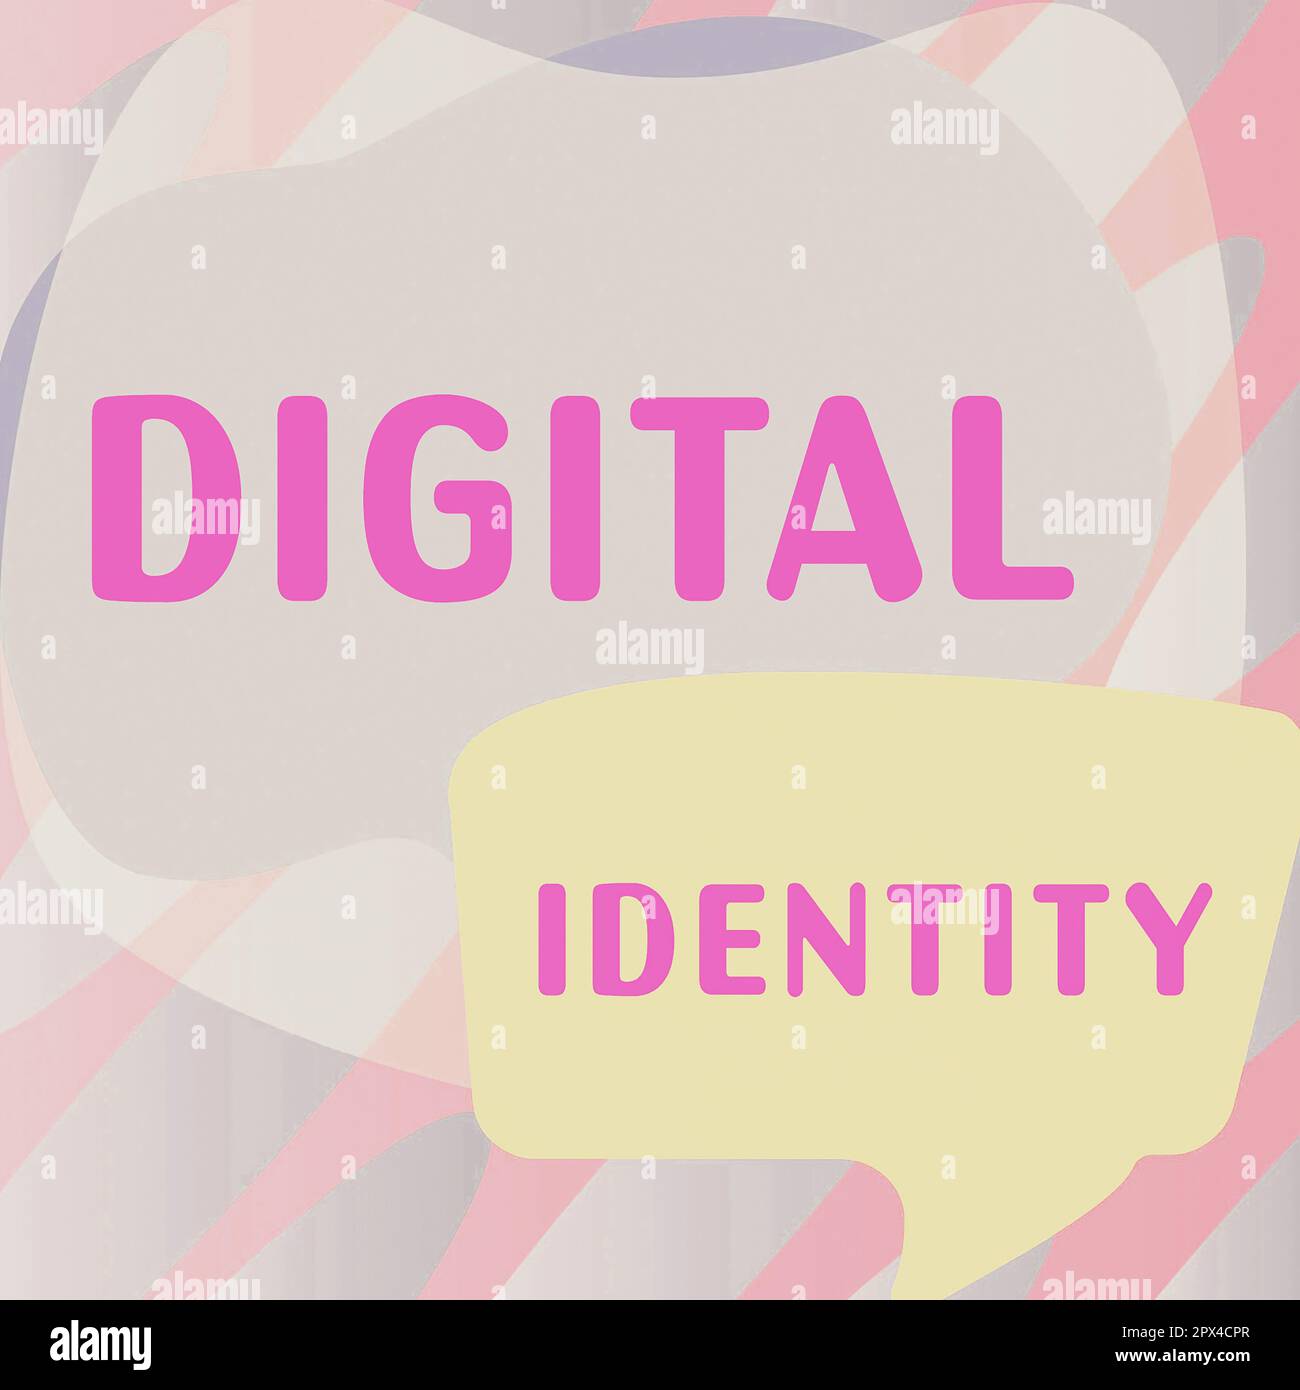 Conceptual display Digital Identity, Concept meaning networked identity adopted or claimed in cyberspace Stock Photo